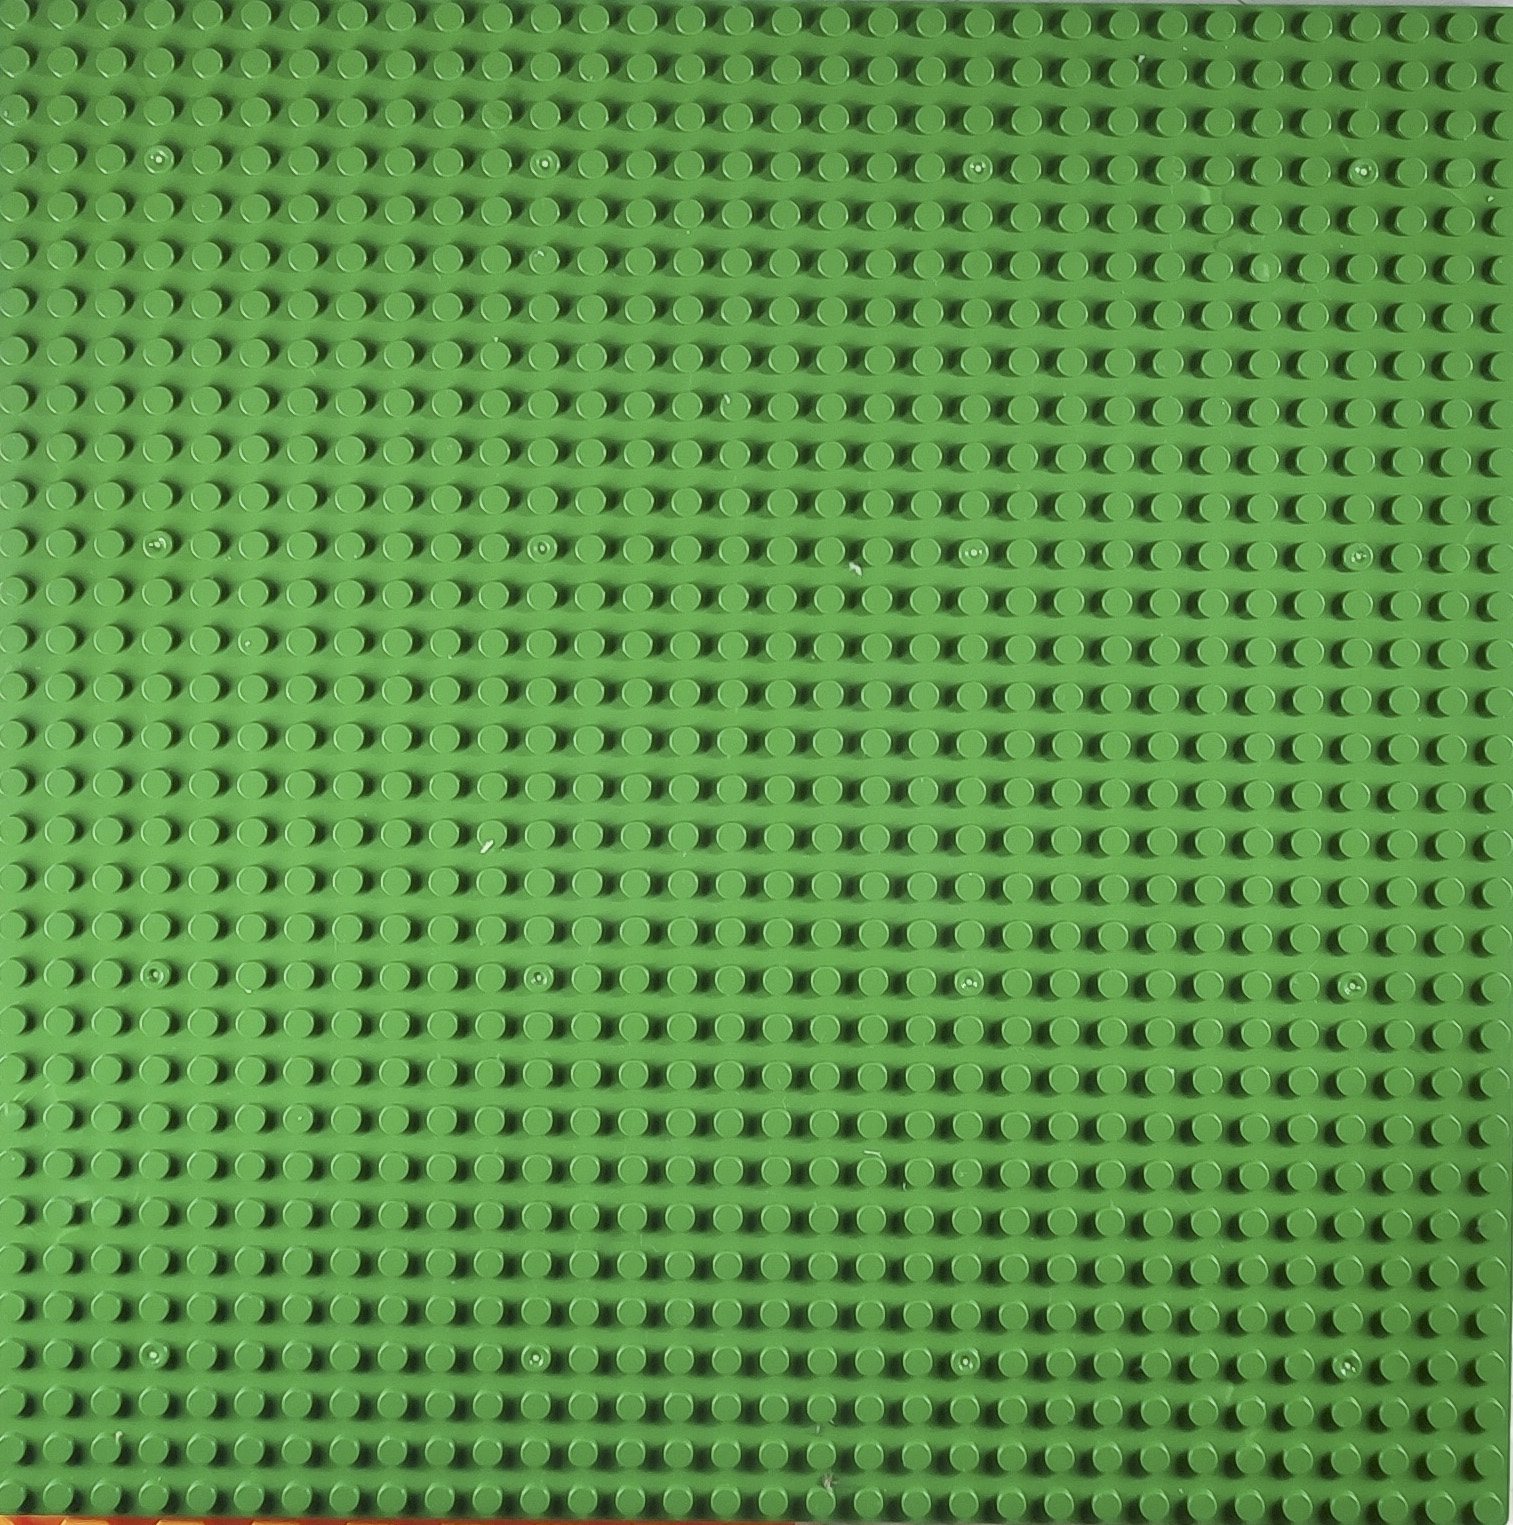 Classic Baseplates, 10"x10" Green Compatible with LEGO